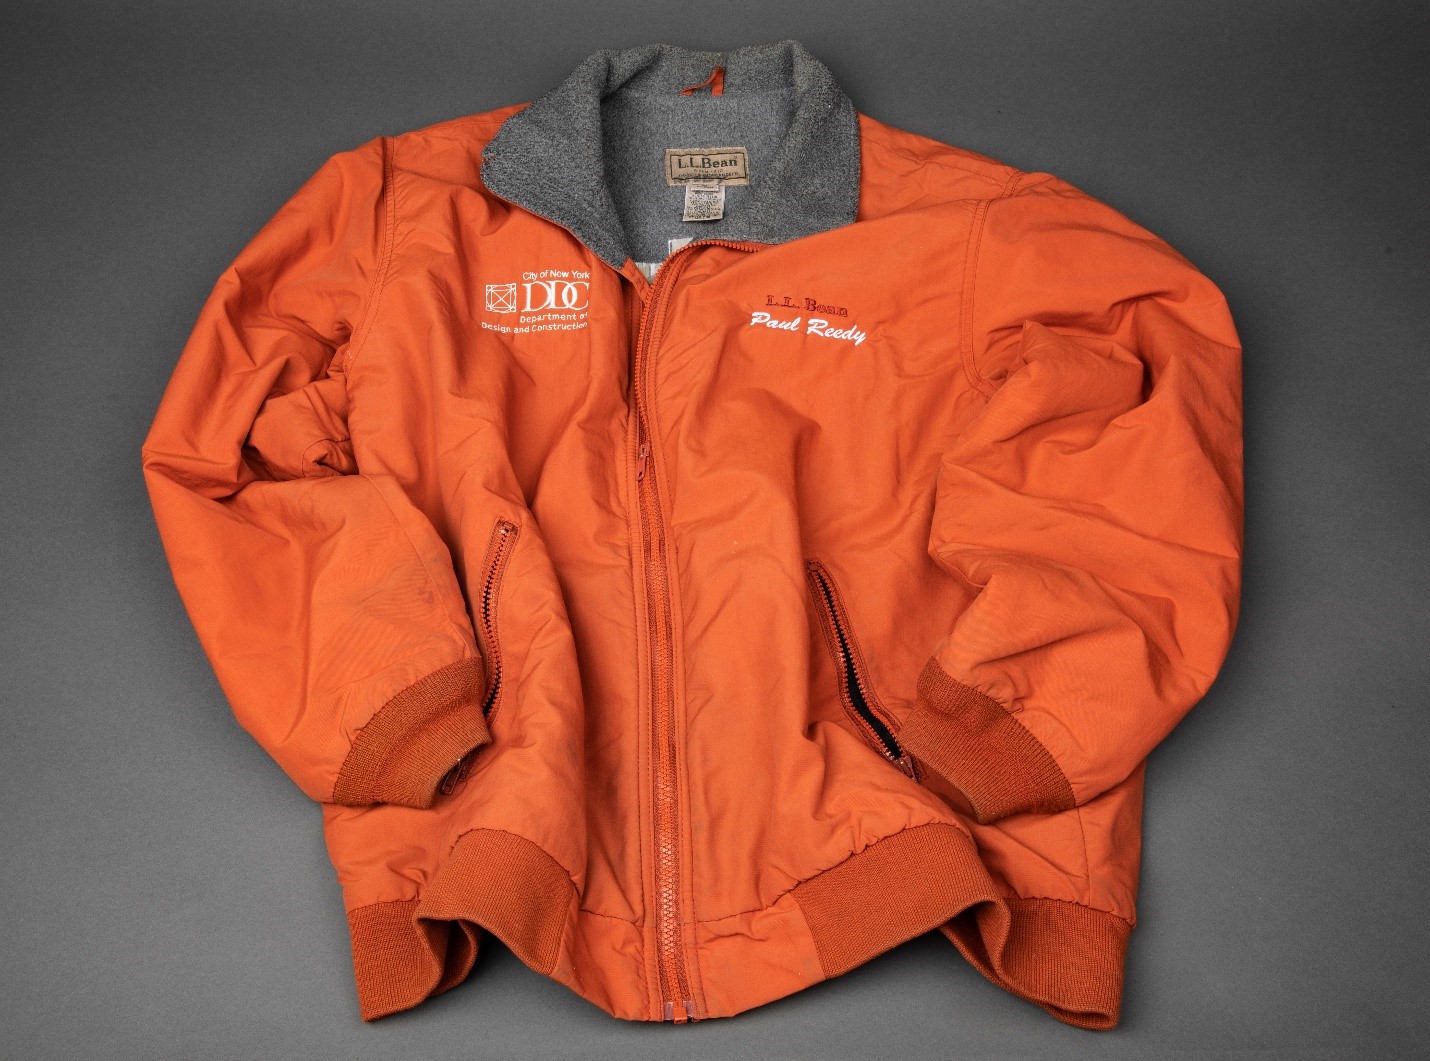 An orange L. L. Bean jacket work by Paul W. Reedy Sr. during his time at the New York City Department of Design and Construction is displayed on a gray surface. Reedy was in a leadership role at Ground Zero.